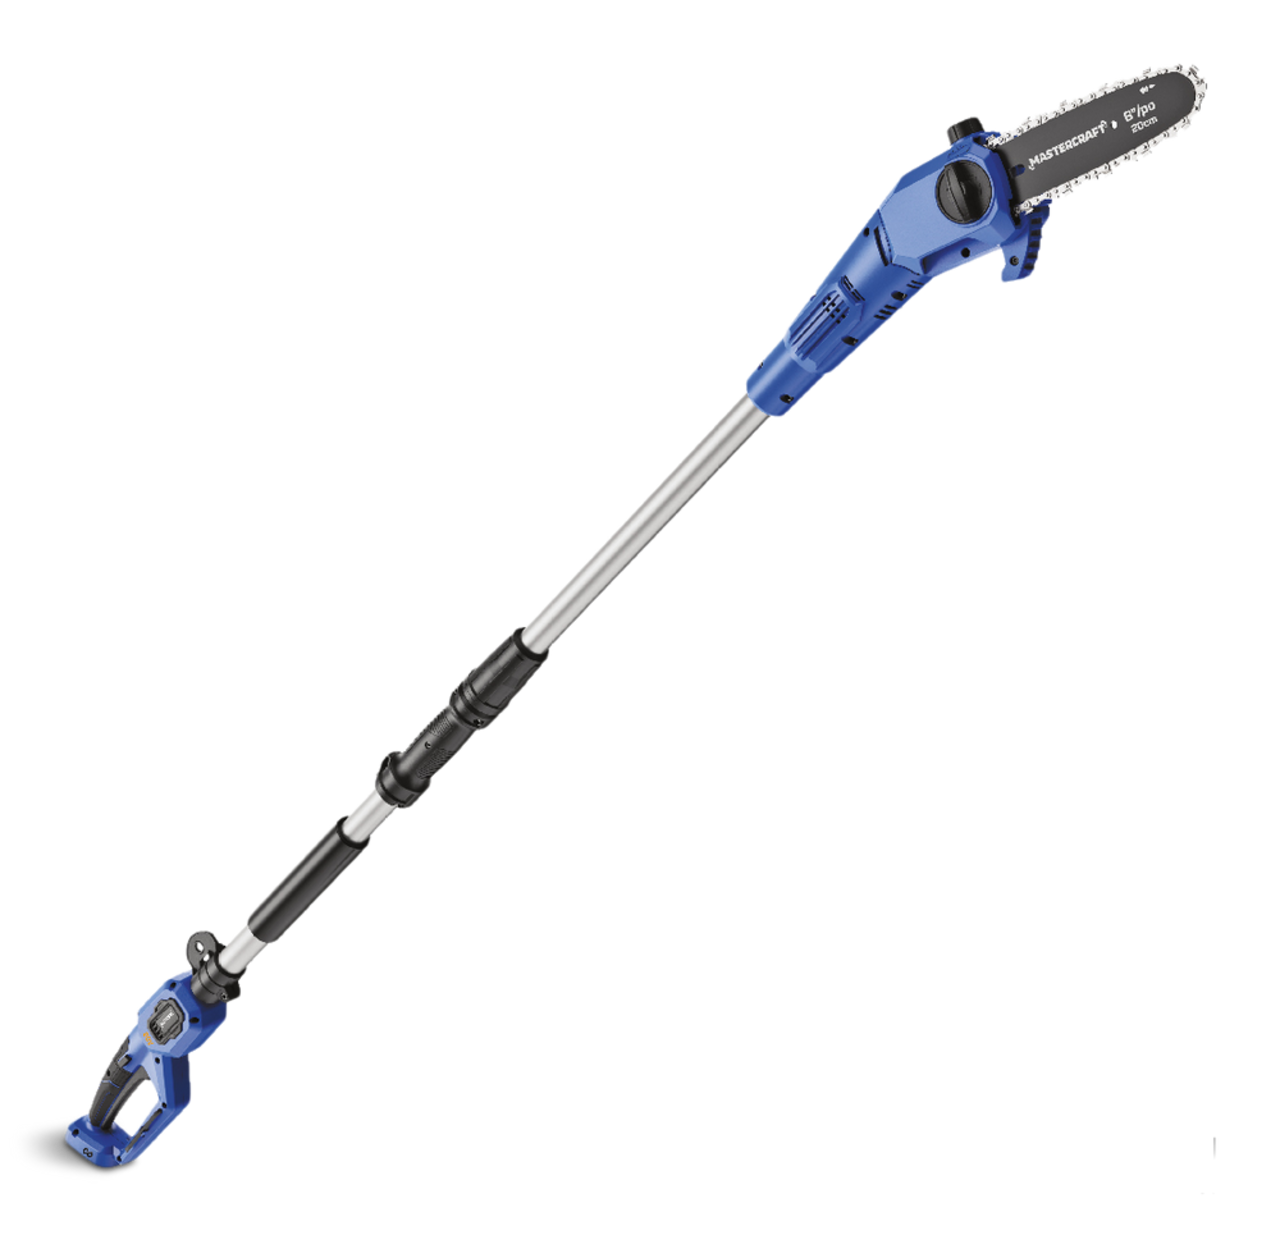 https://media-www.canadiantire.ca/product/seasonal-gardening/outdoor-tools/hand-held-outdoor-power-tools/0540370/mastercraft-20v-8-polesaw-26fd6bde-40be-47cf-96ae-4949debdfc66.png?imdensity=1&imwidth=640&impolicy=mZoom